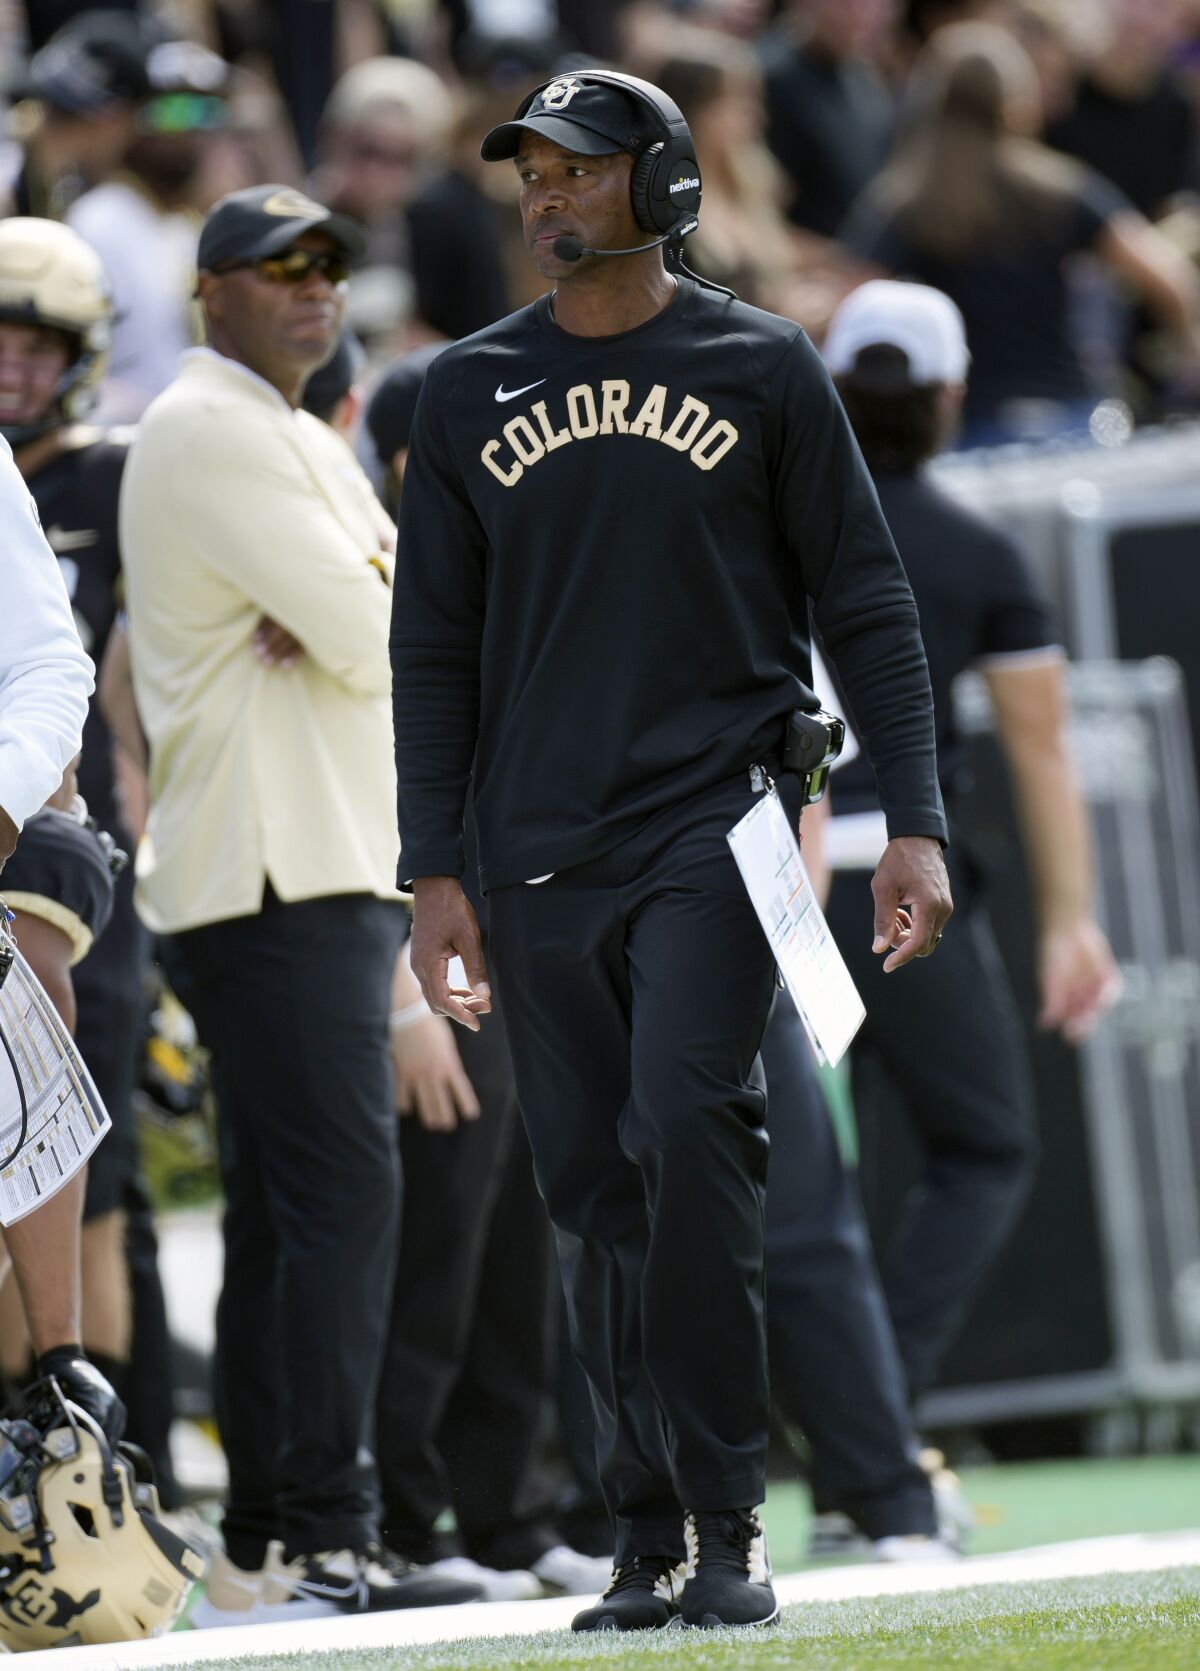 Colorado head coach Karl Dorrell walks the sideline in the first half of an NCAA college football game against Southern California Saturday, Oct. 2, 2021, in Boulder, Colo. Dorrell shoved a television photographer from a Denver CBS affiliate while leaving the field after the loss. (AP Photo/David Zalubowski)